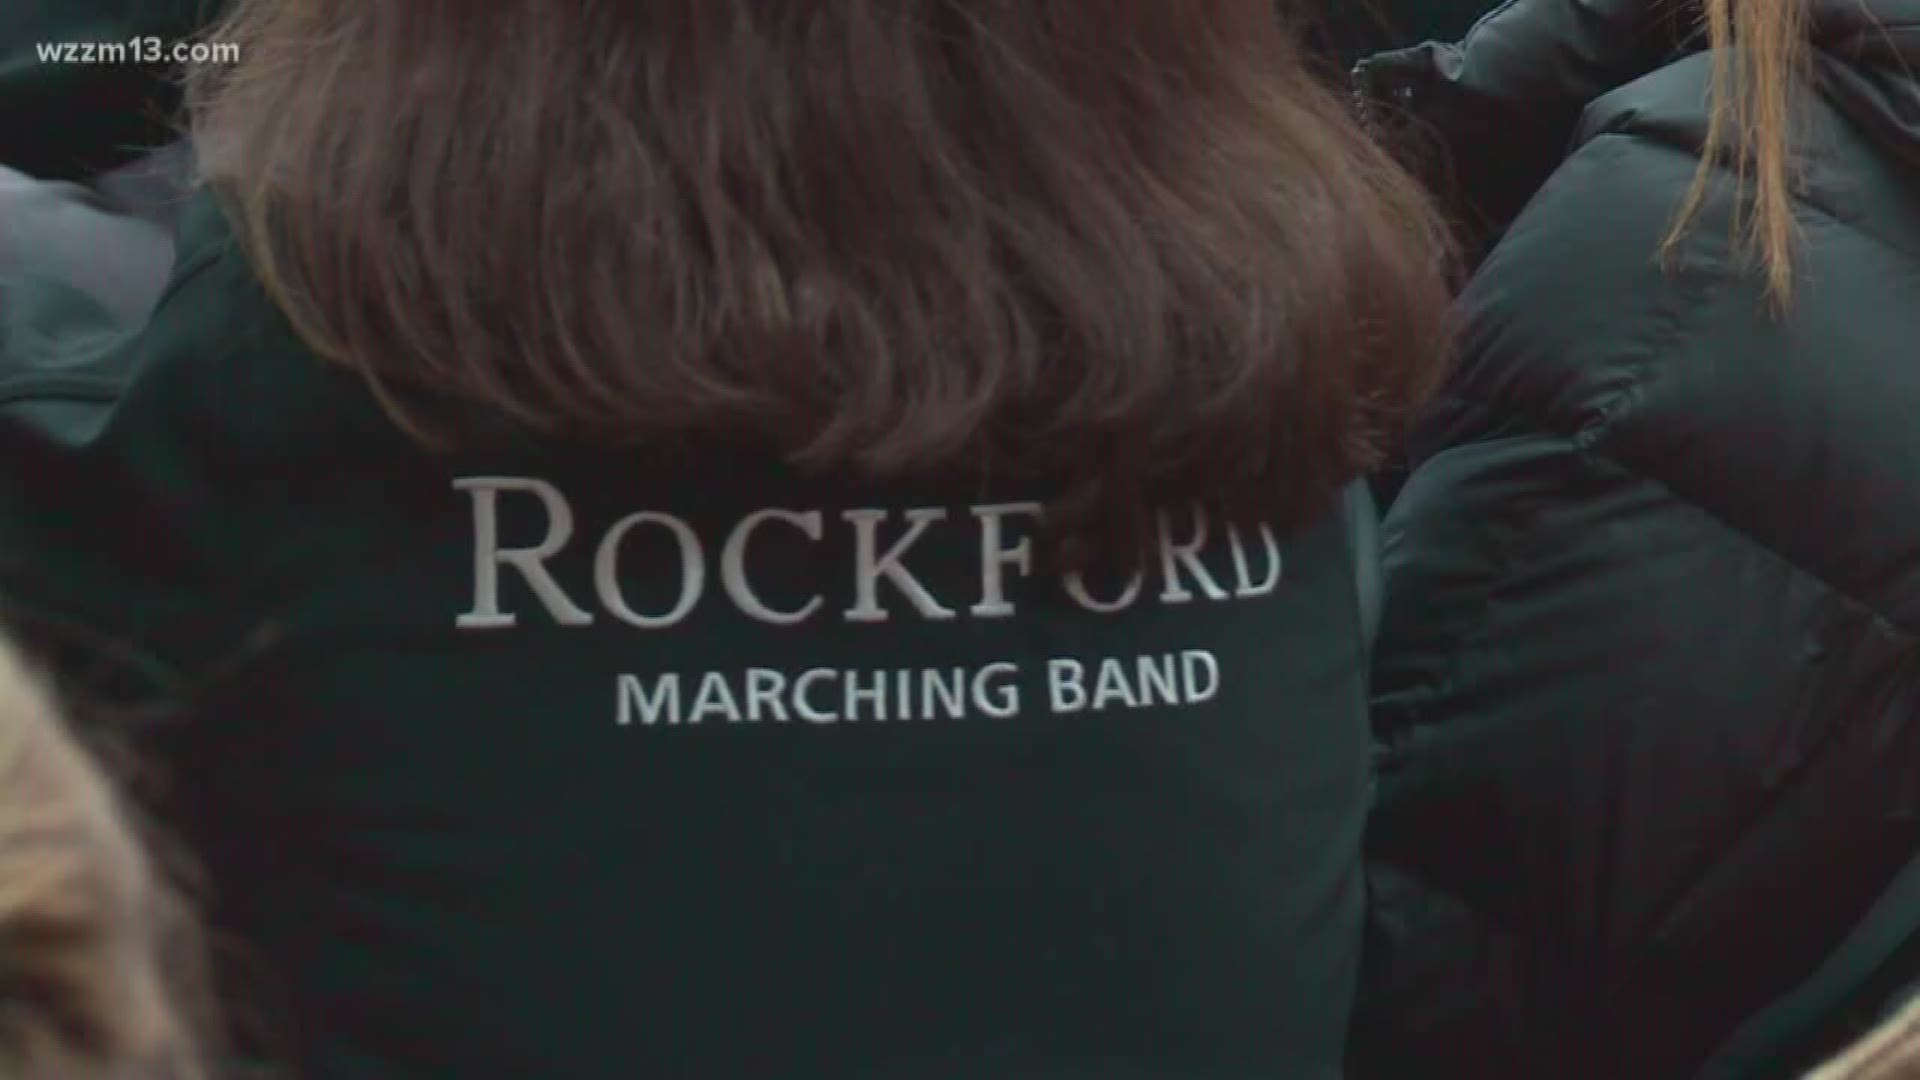 Rockford band prepares for Macy's parade appearance